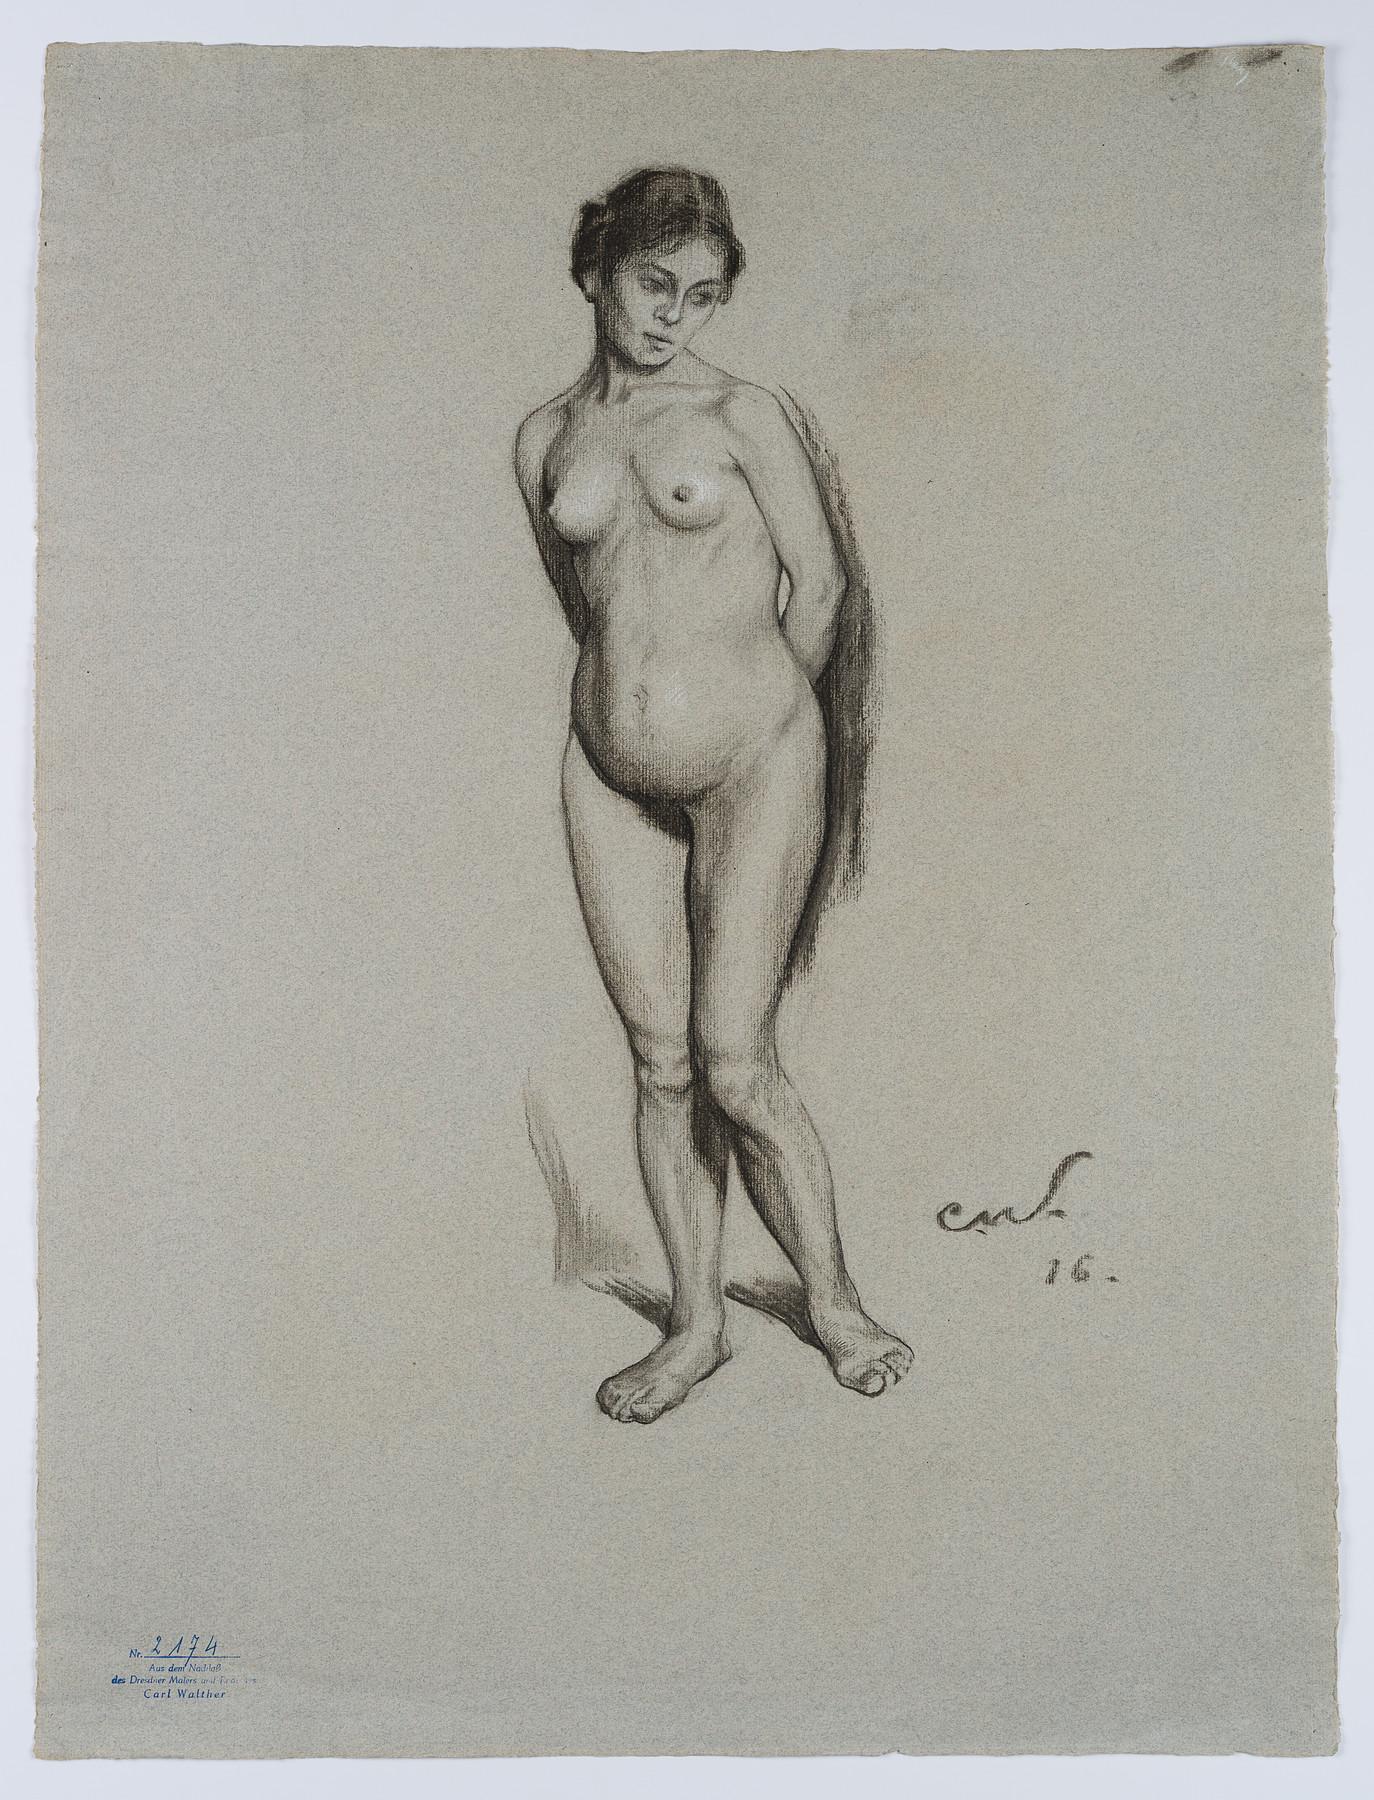 Nude study of his wife Vera - Art by Carl August Walther